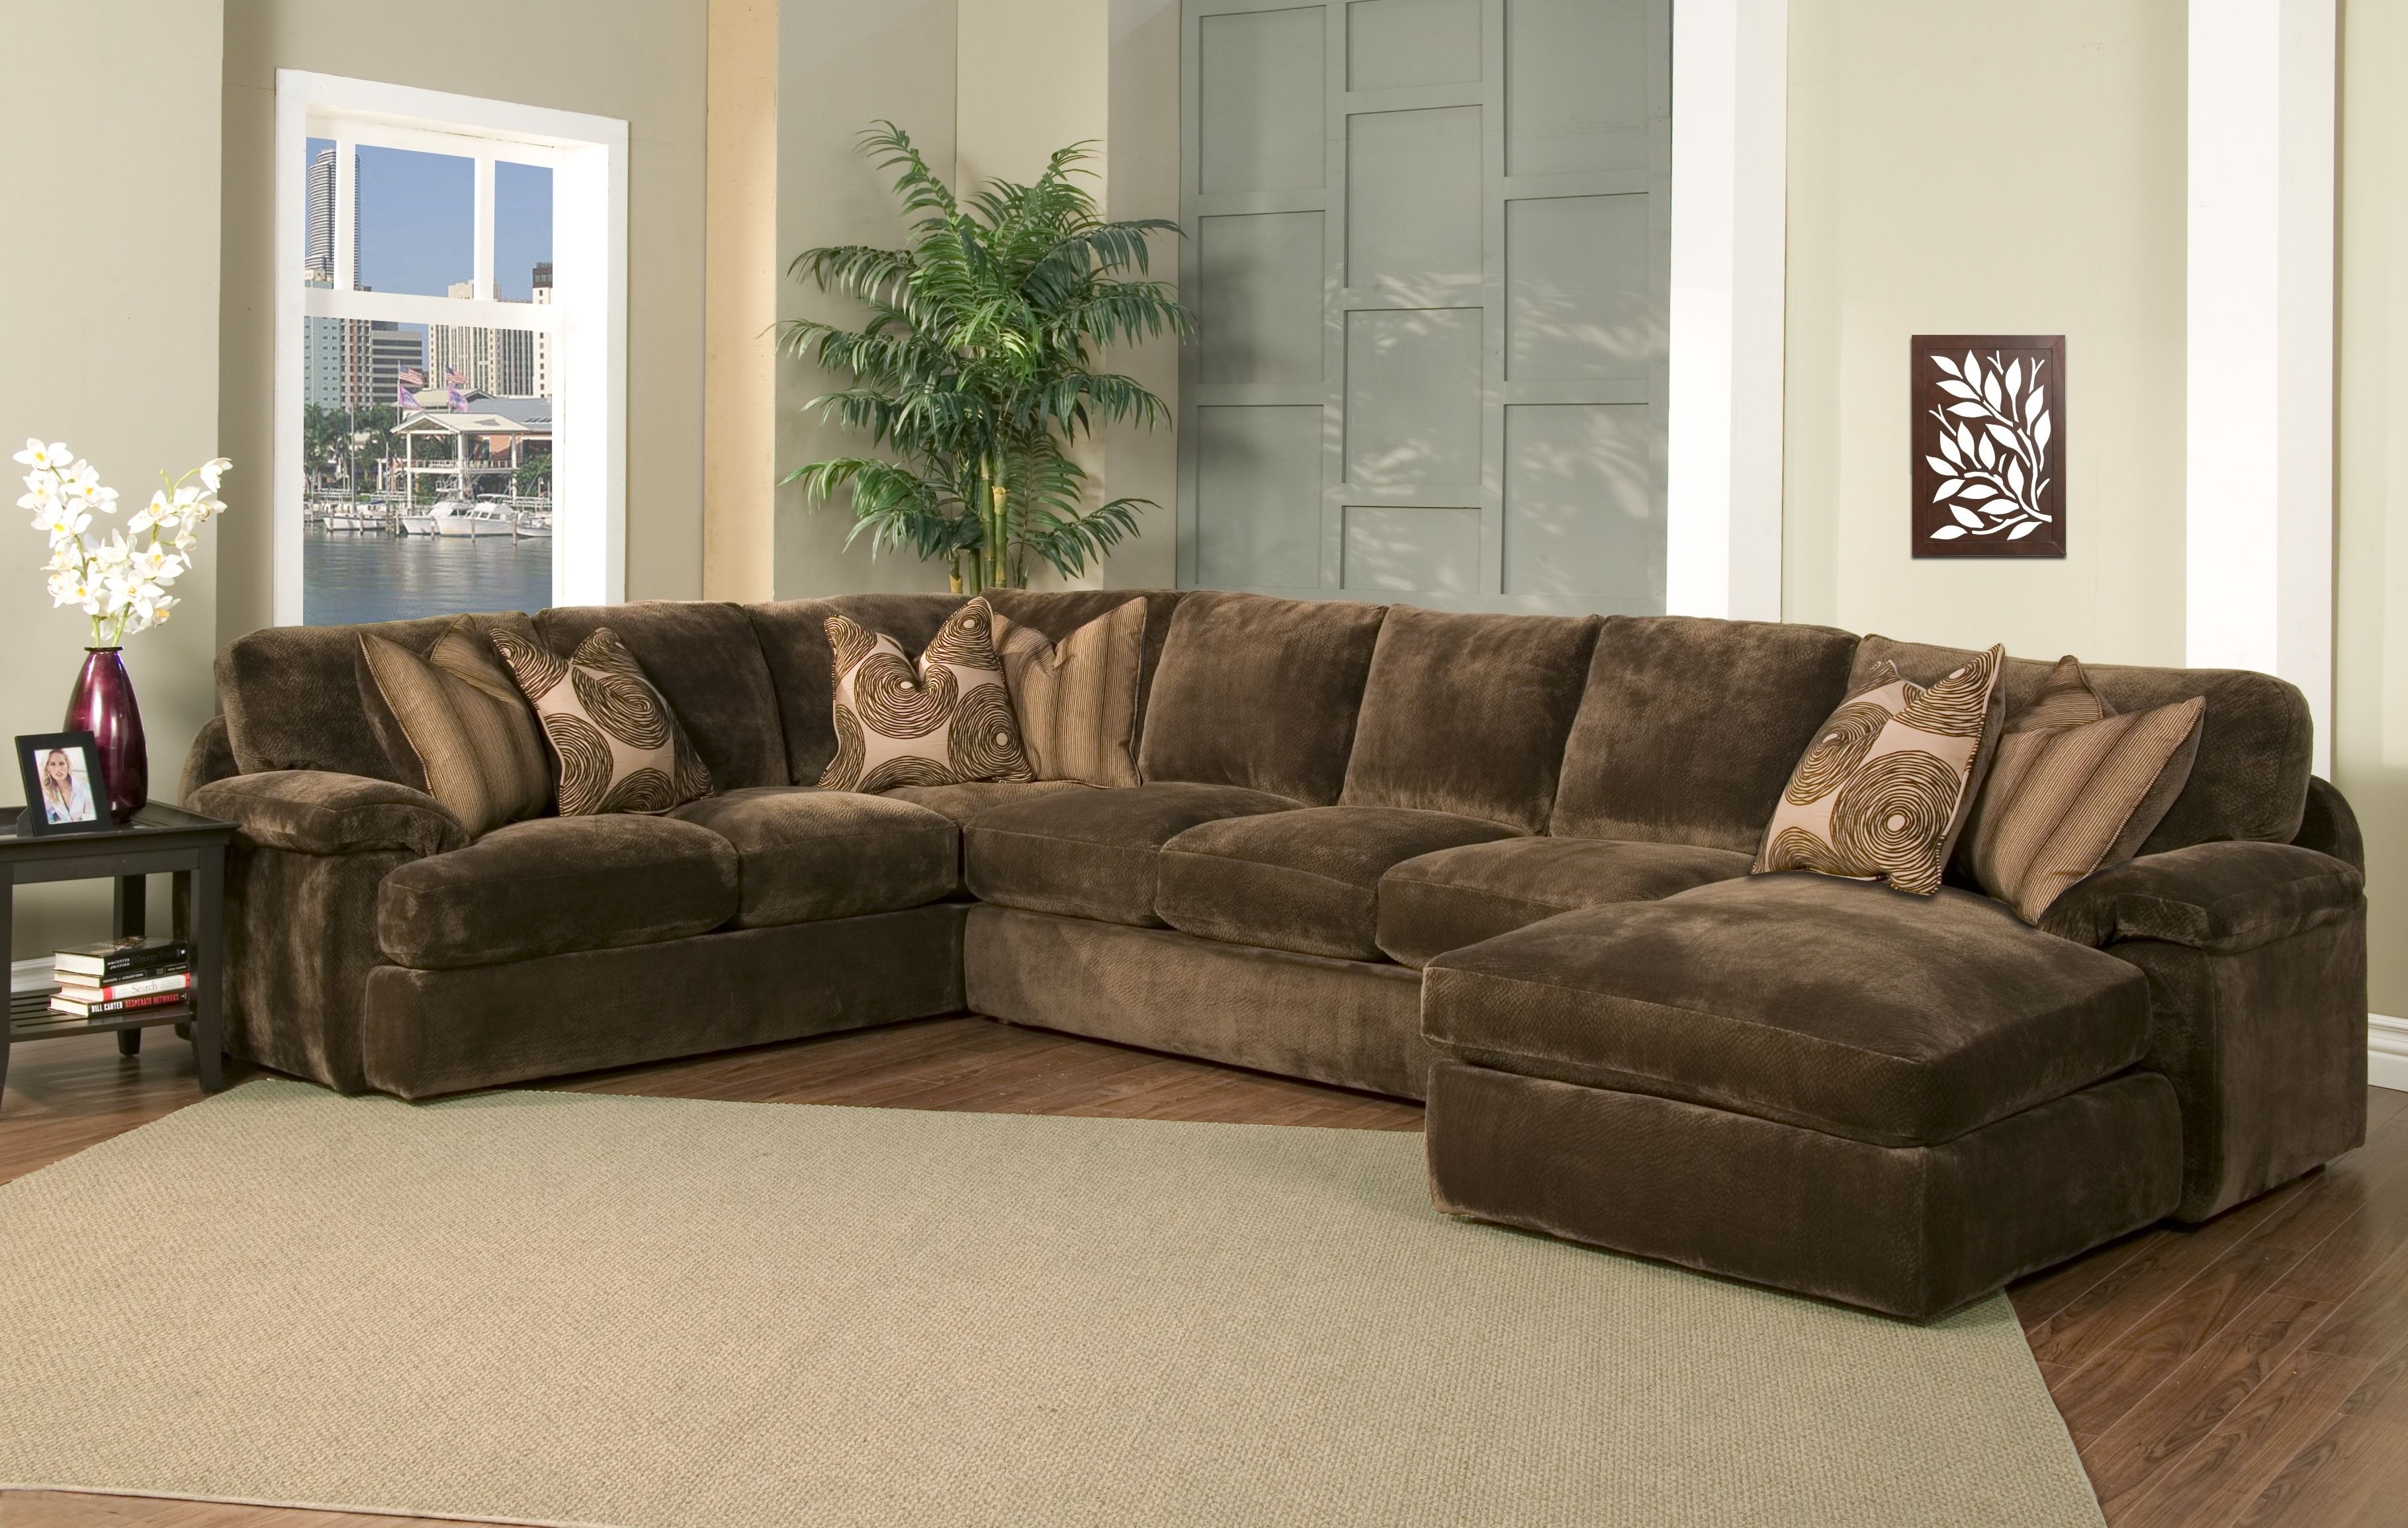 Down Feather Sectional Sofa • Sectional Sofa With Regard To Down Feather Sectional Sofas (Photo 4 of 10)